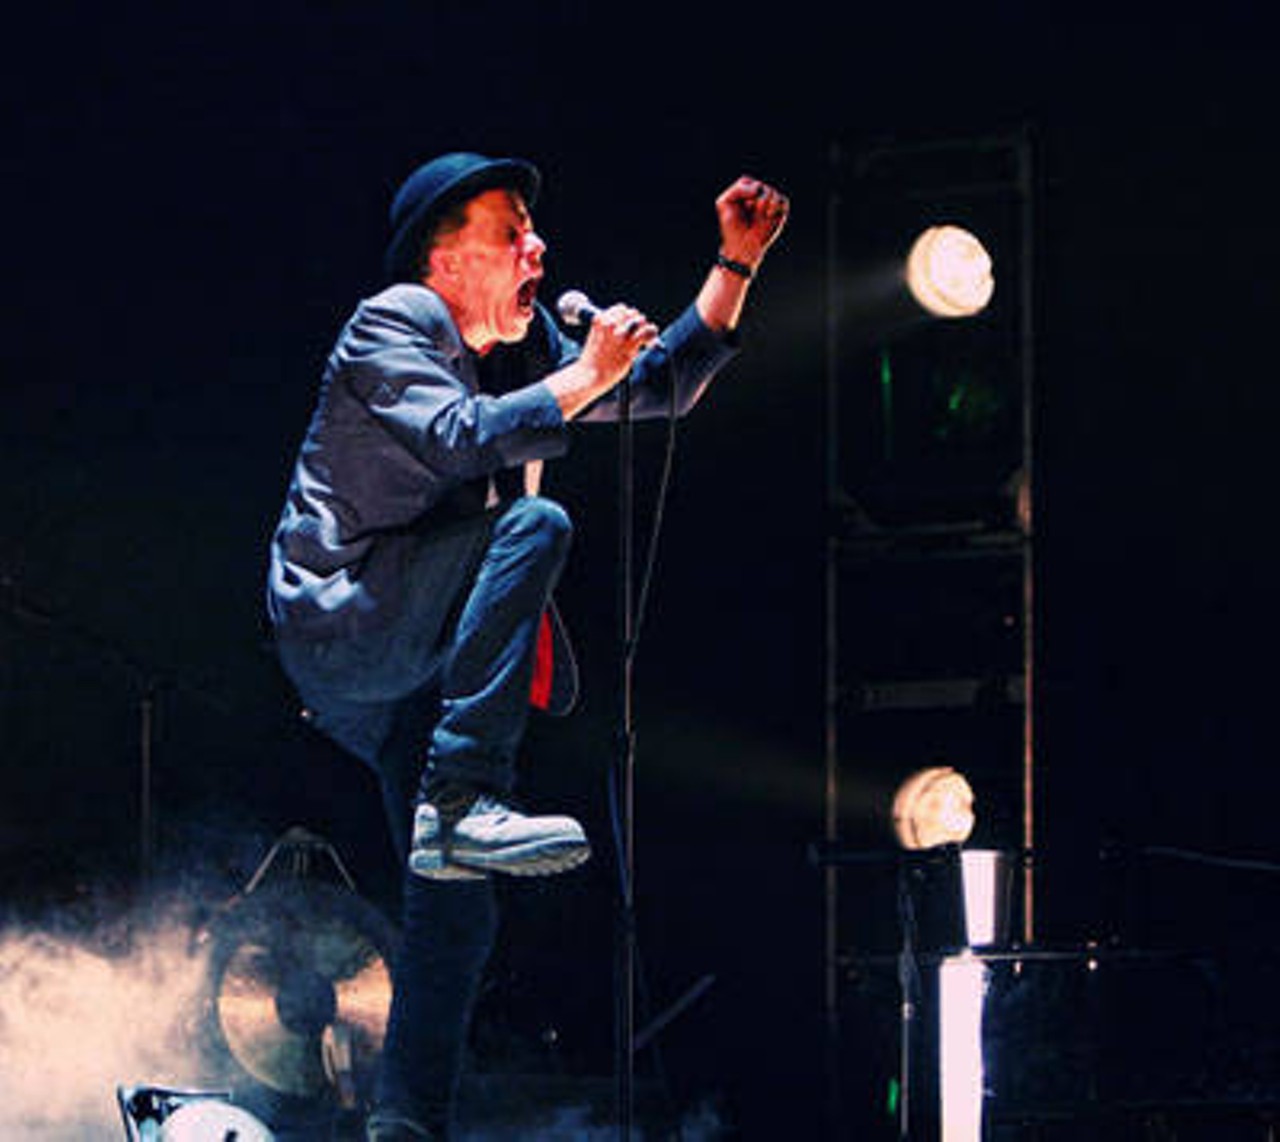 Tom Waits played at the Fabulous Fox Theatre on June 26. See more photos here.